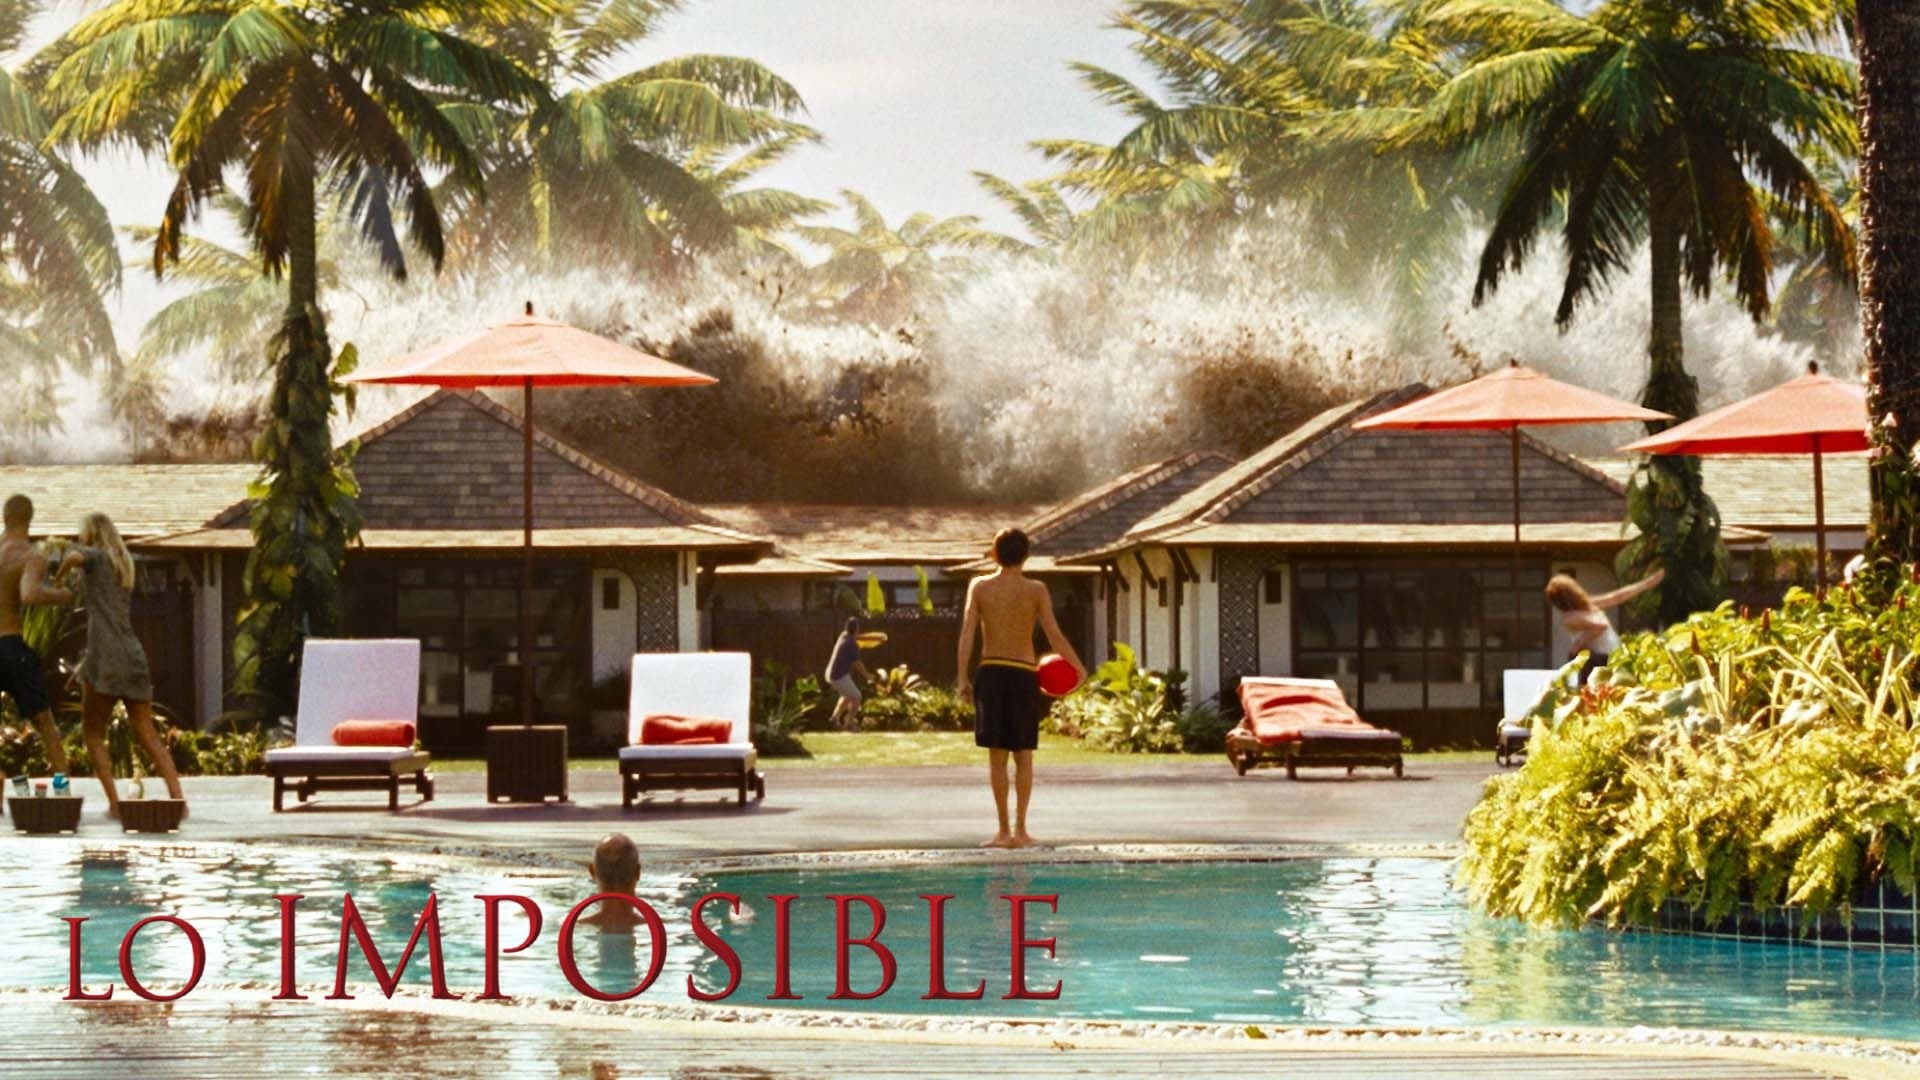 Lo imposible